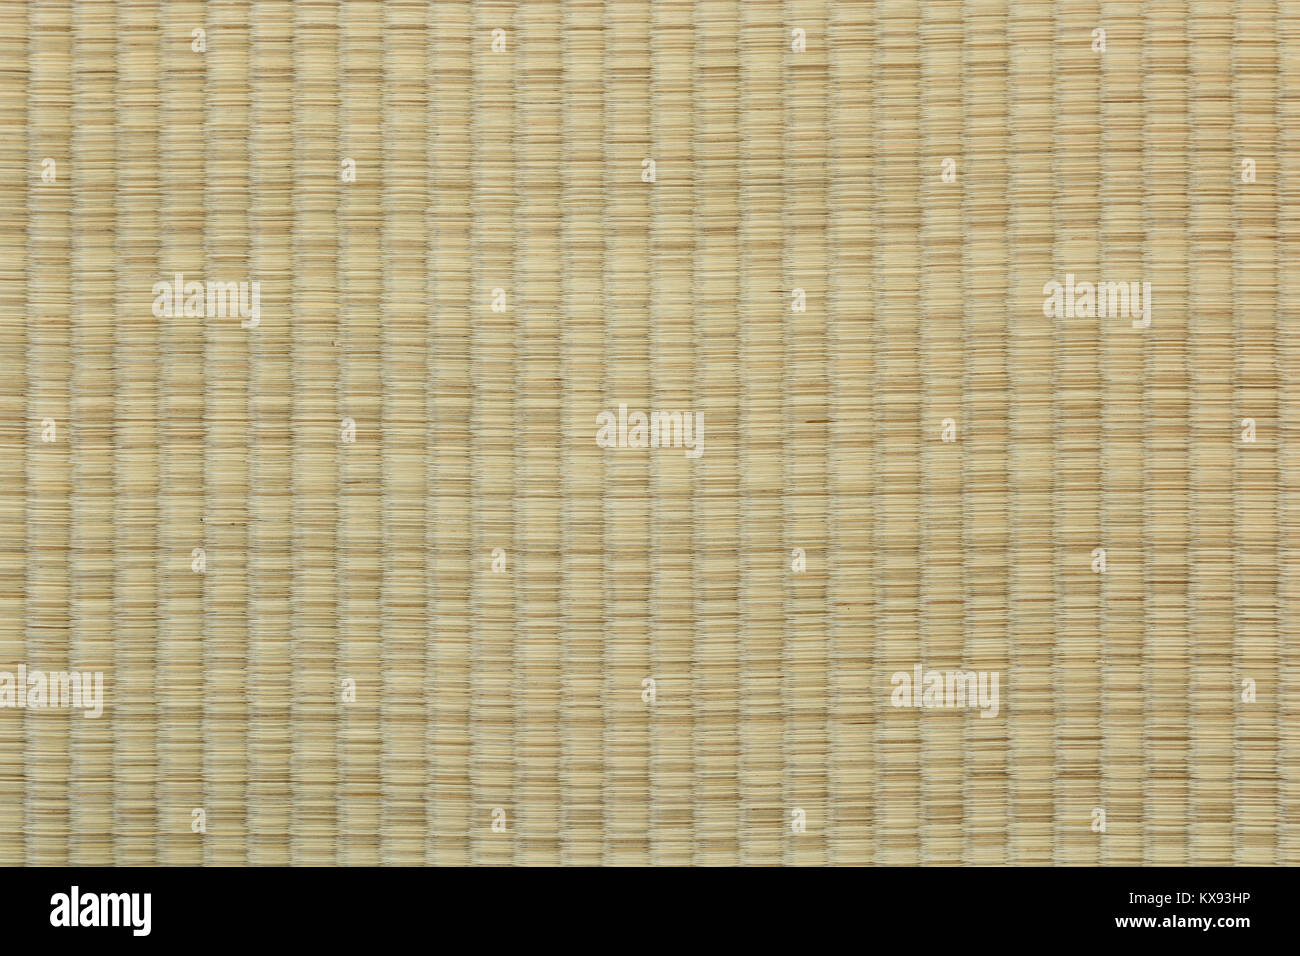 Close-up view of a tatami, a traditional japanese rice straw mat with compressed rice straw fillings. Stock Photo